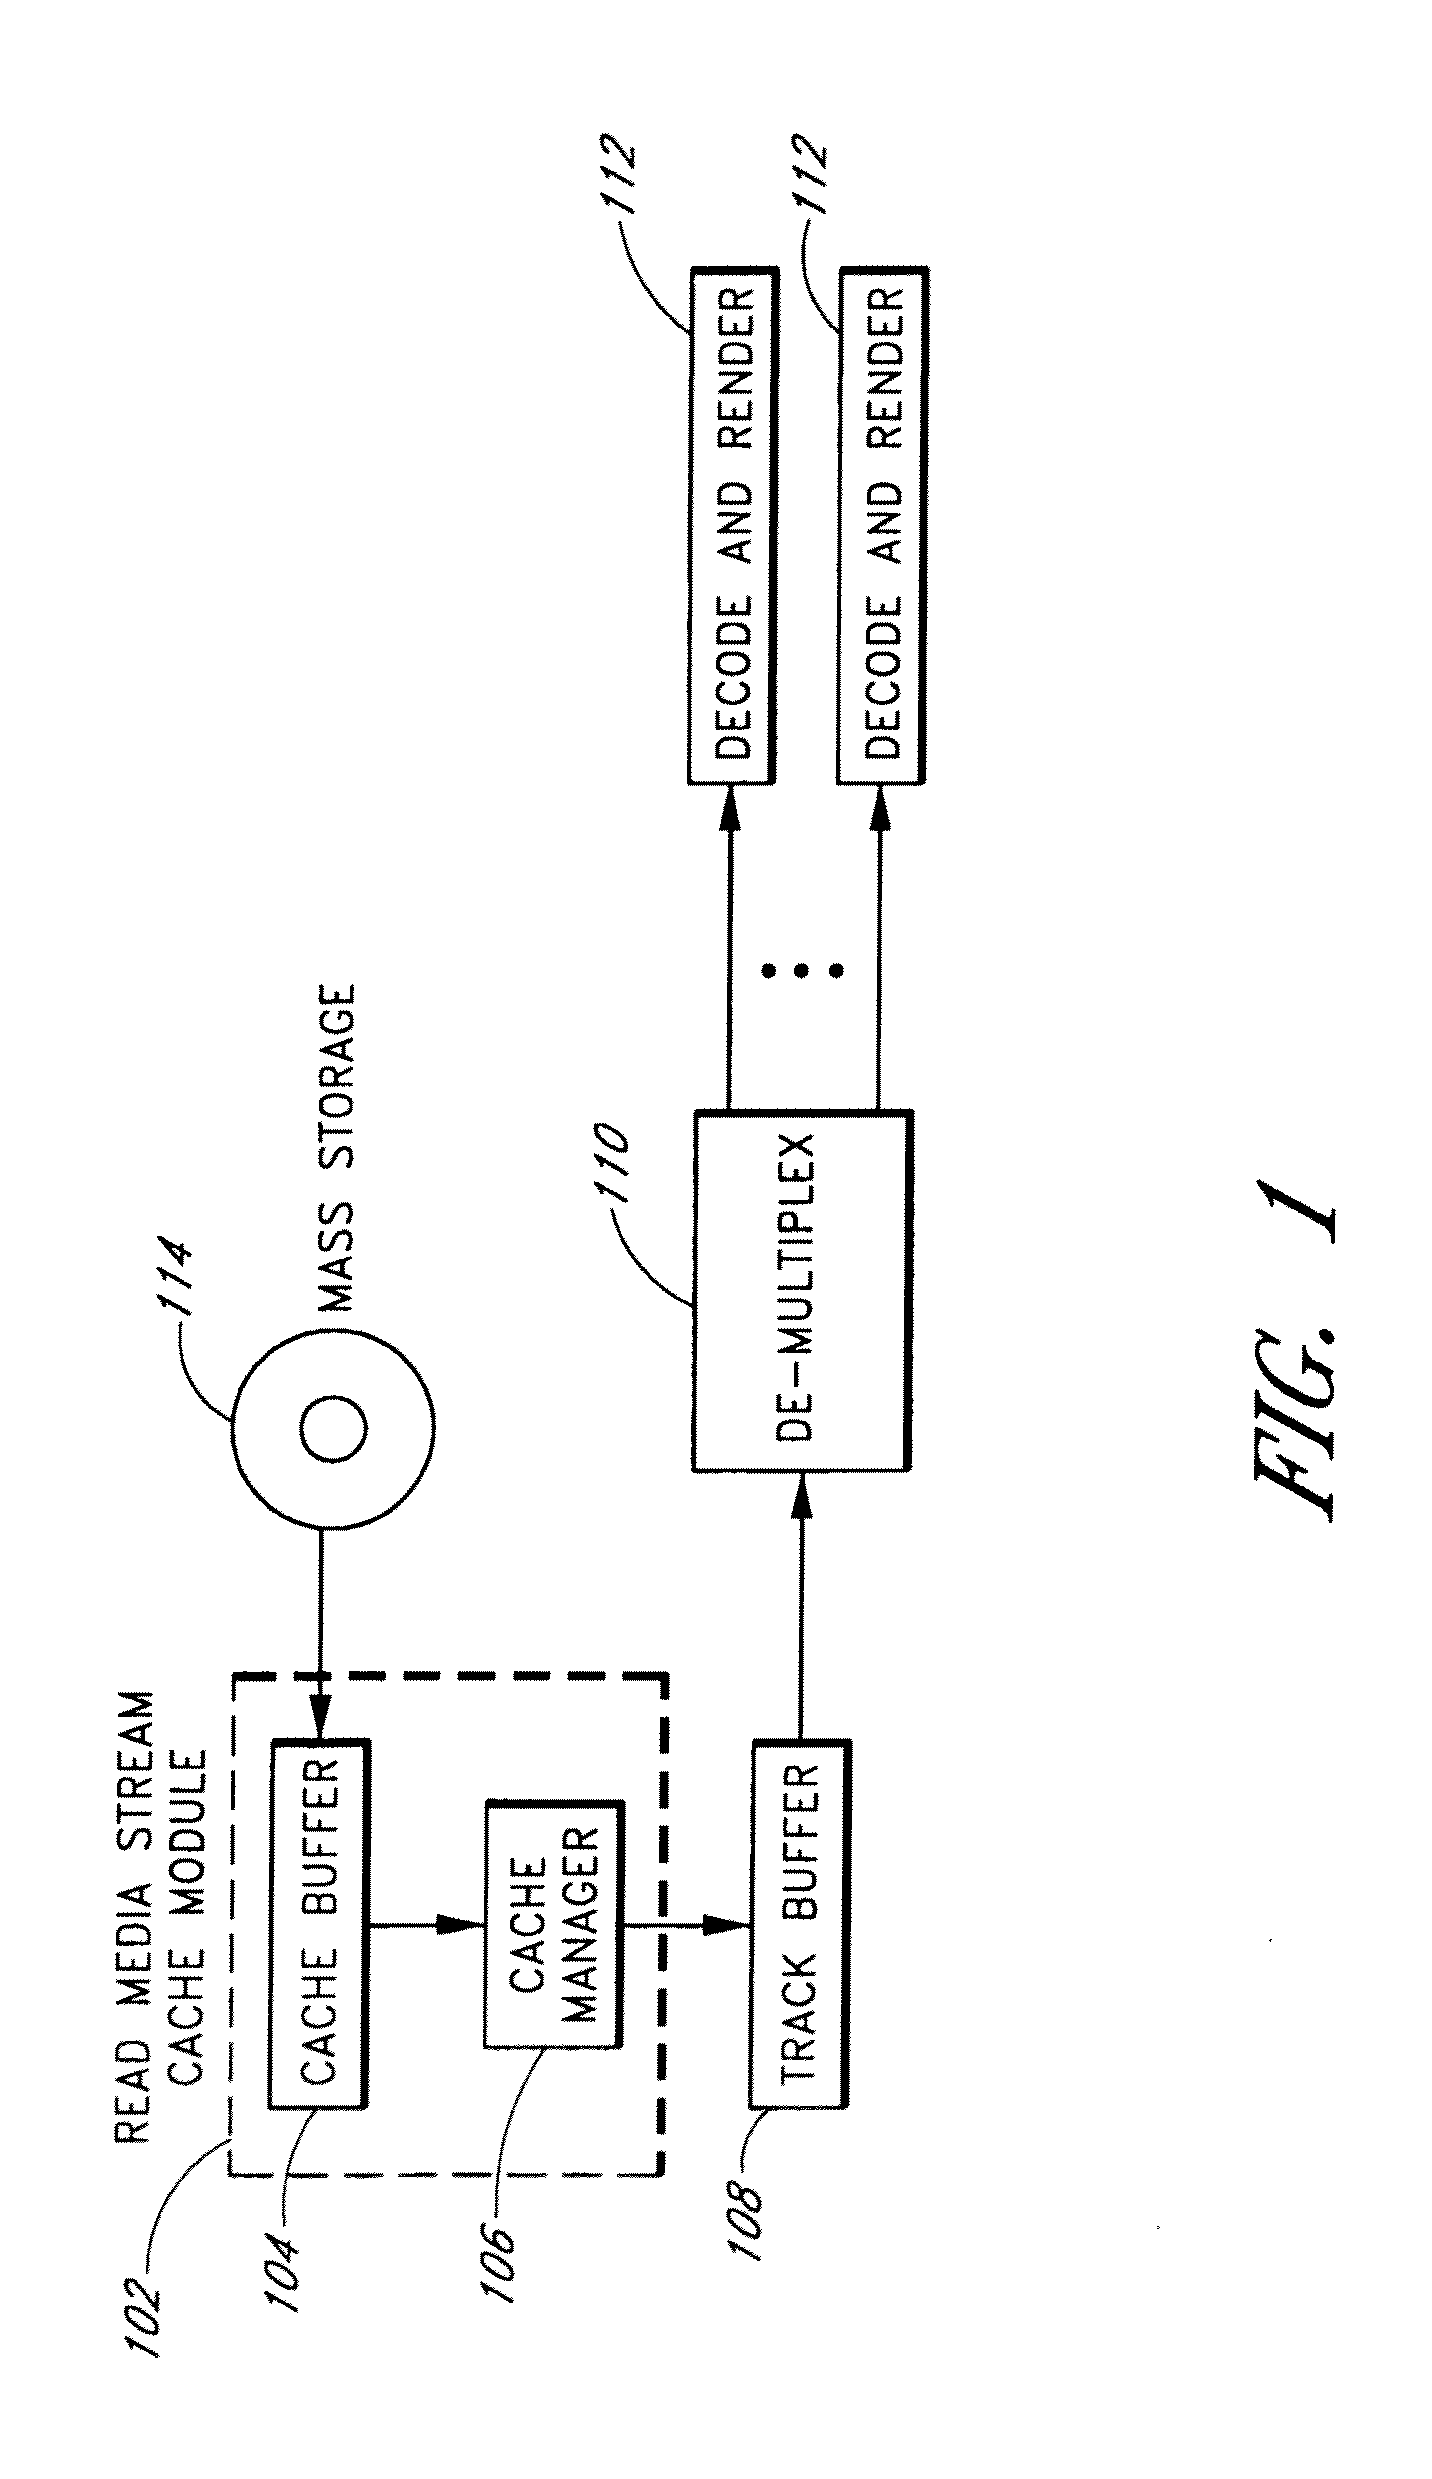 System and Method for Caching Multimedia Data